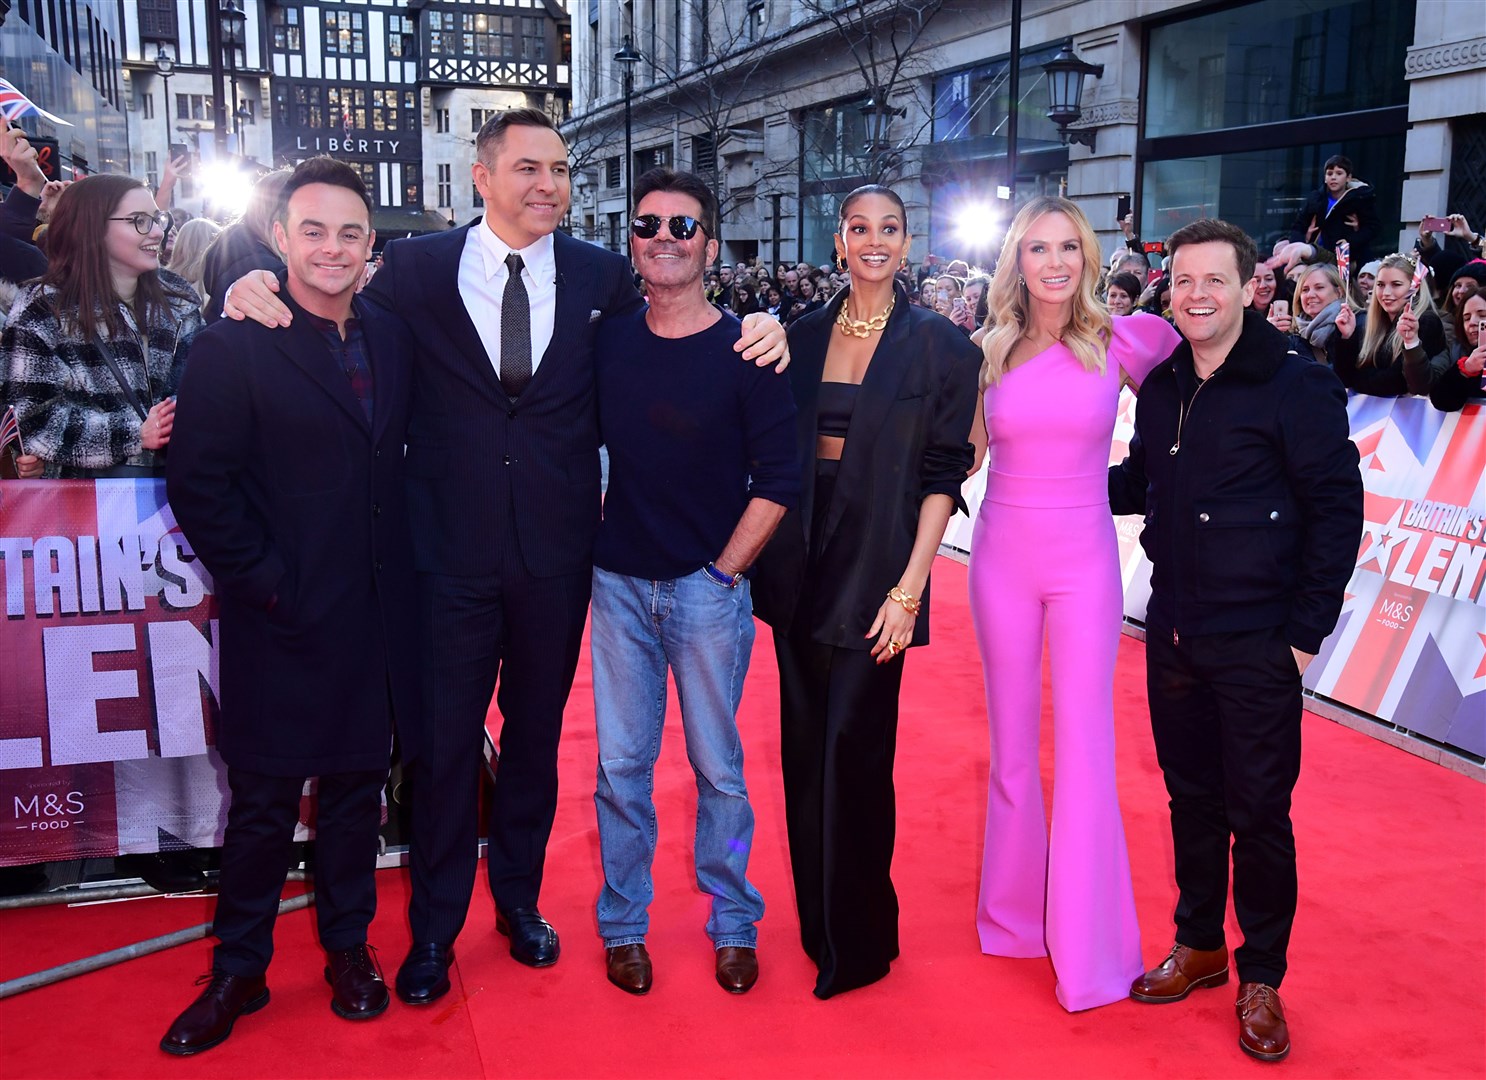 Anthony McPartlin, David Walliams Simon Cowell, Alesha Dixon, Amanda Holden and Declan Donnelly attending a Britain’s Got Talent photocall (Ian West/PA)